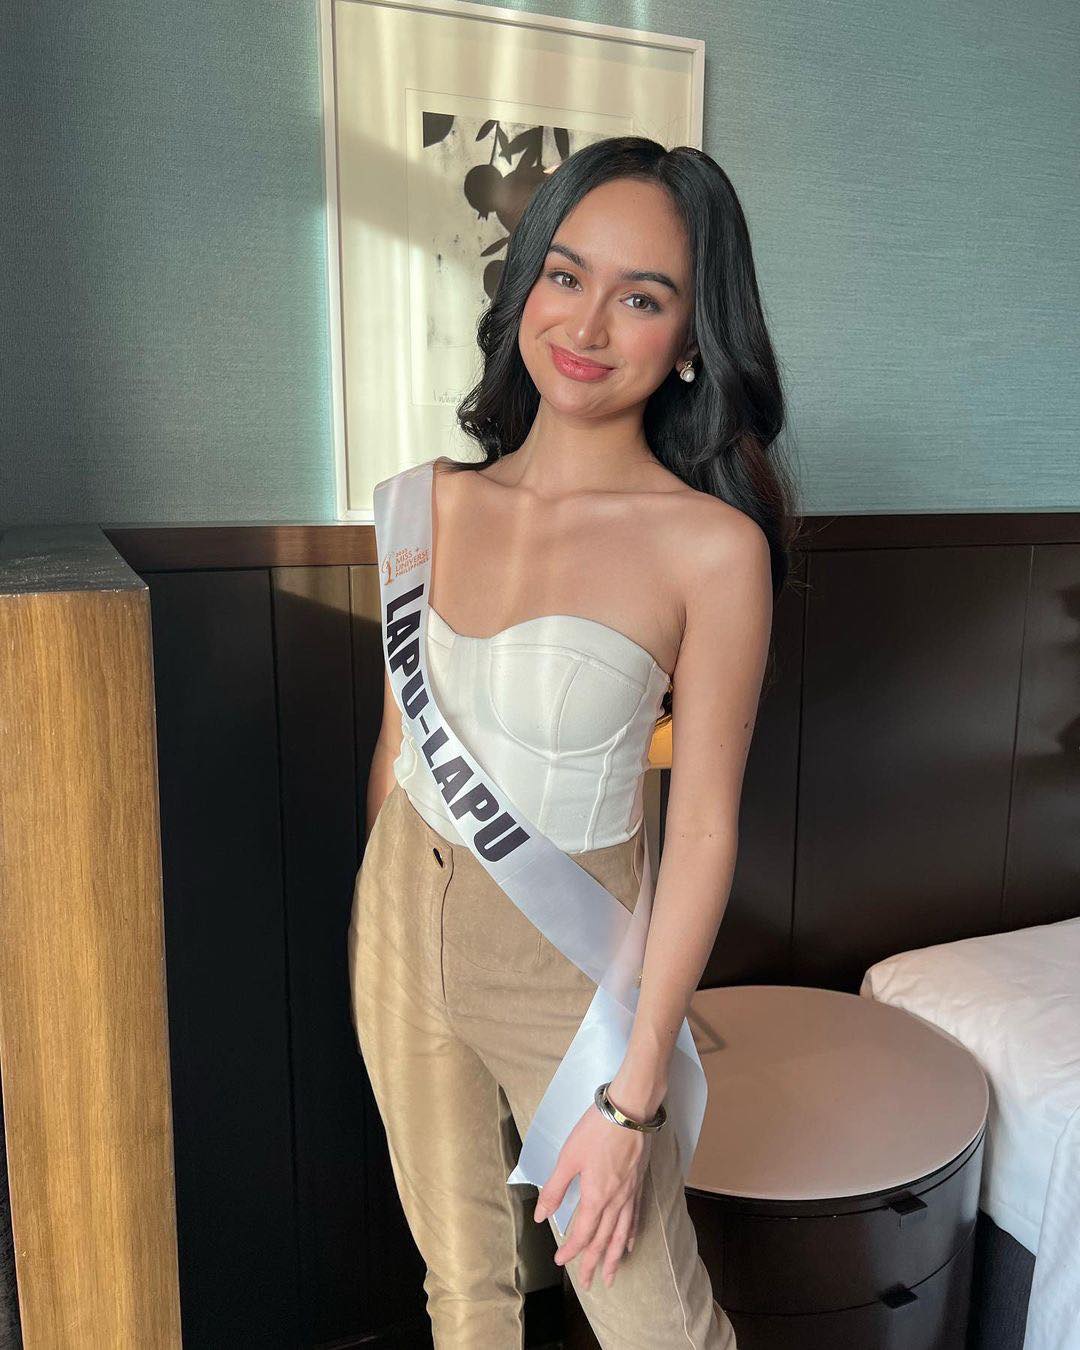 FACES OF CEBU Clare Inso, 24, Miss Universe Philippines 2023 candidate Cebu Daily News